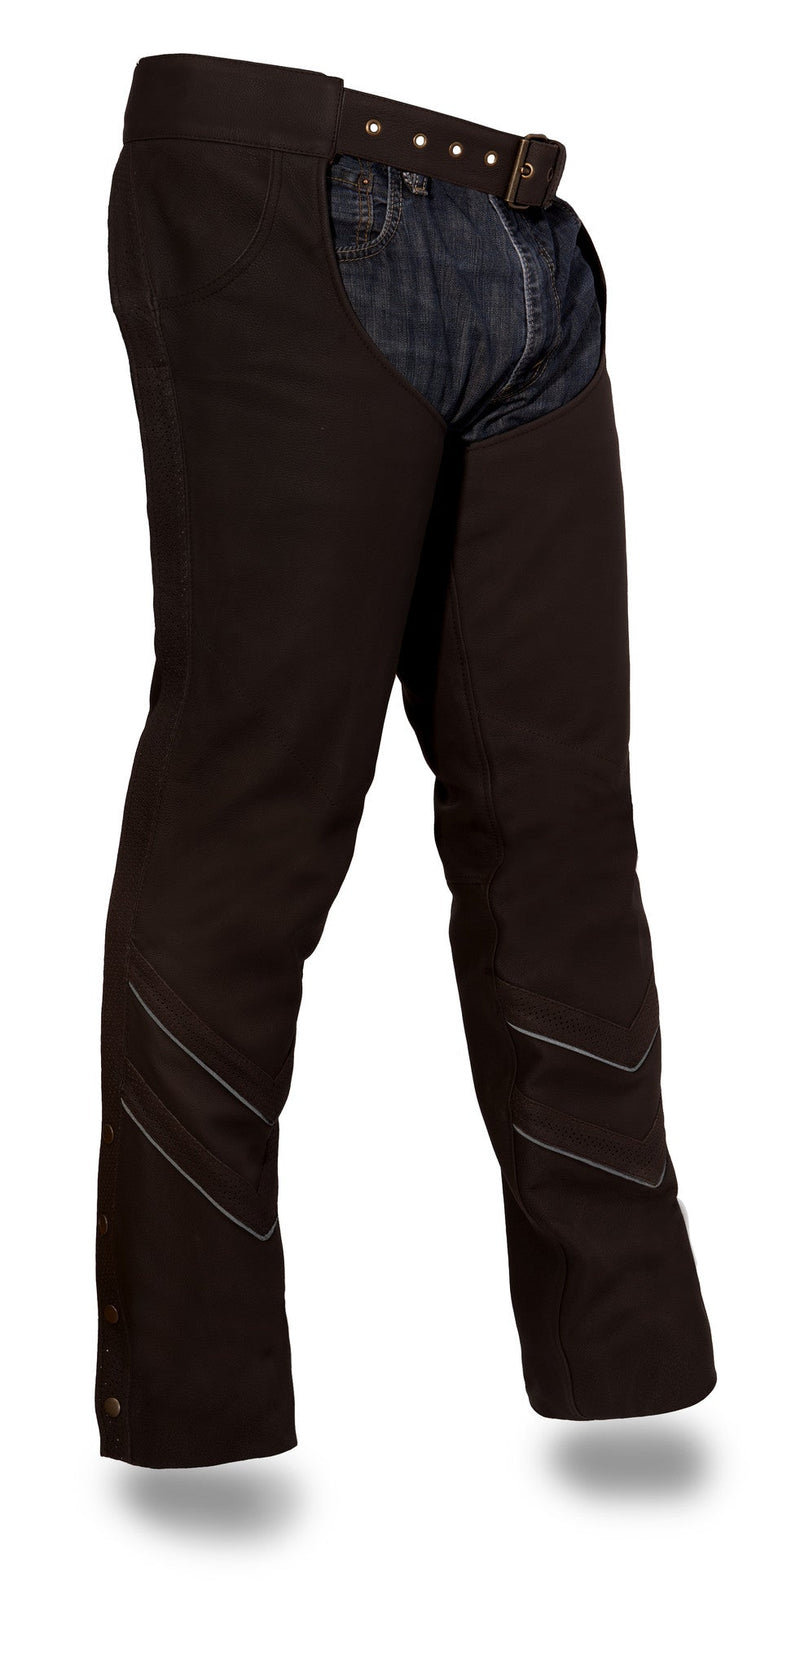 Bronco - Men's Leather Motorcycle Chaps Chaps First Manufacturing Company S Black 